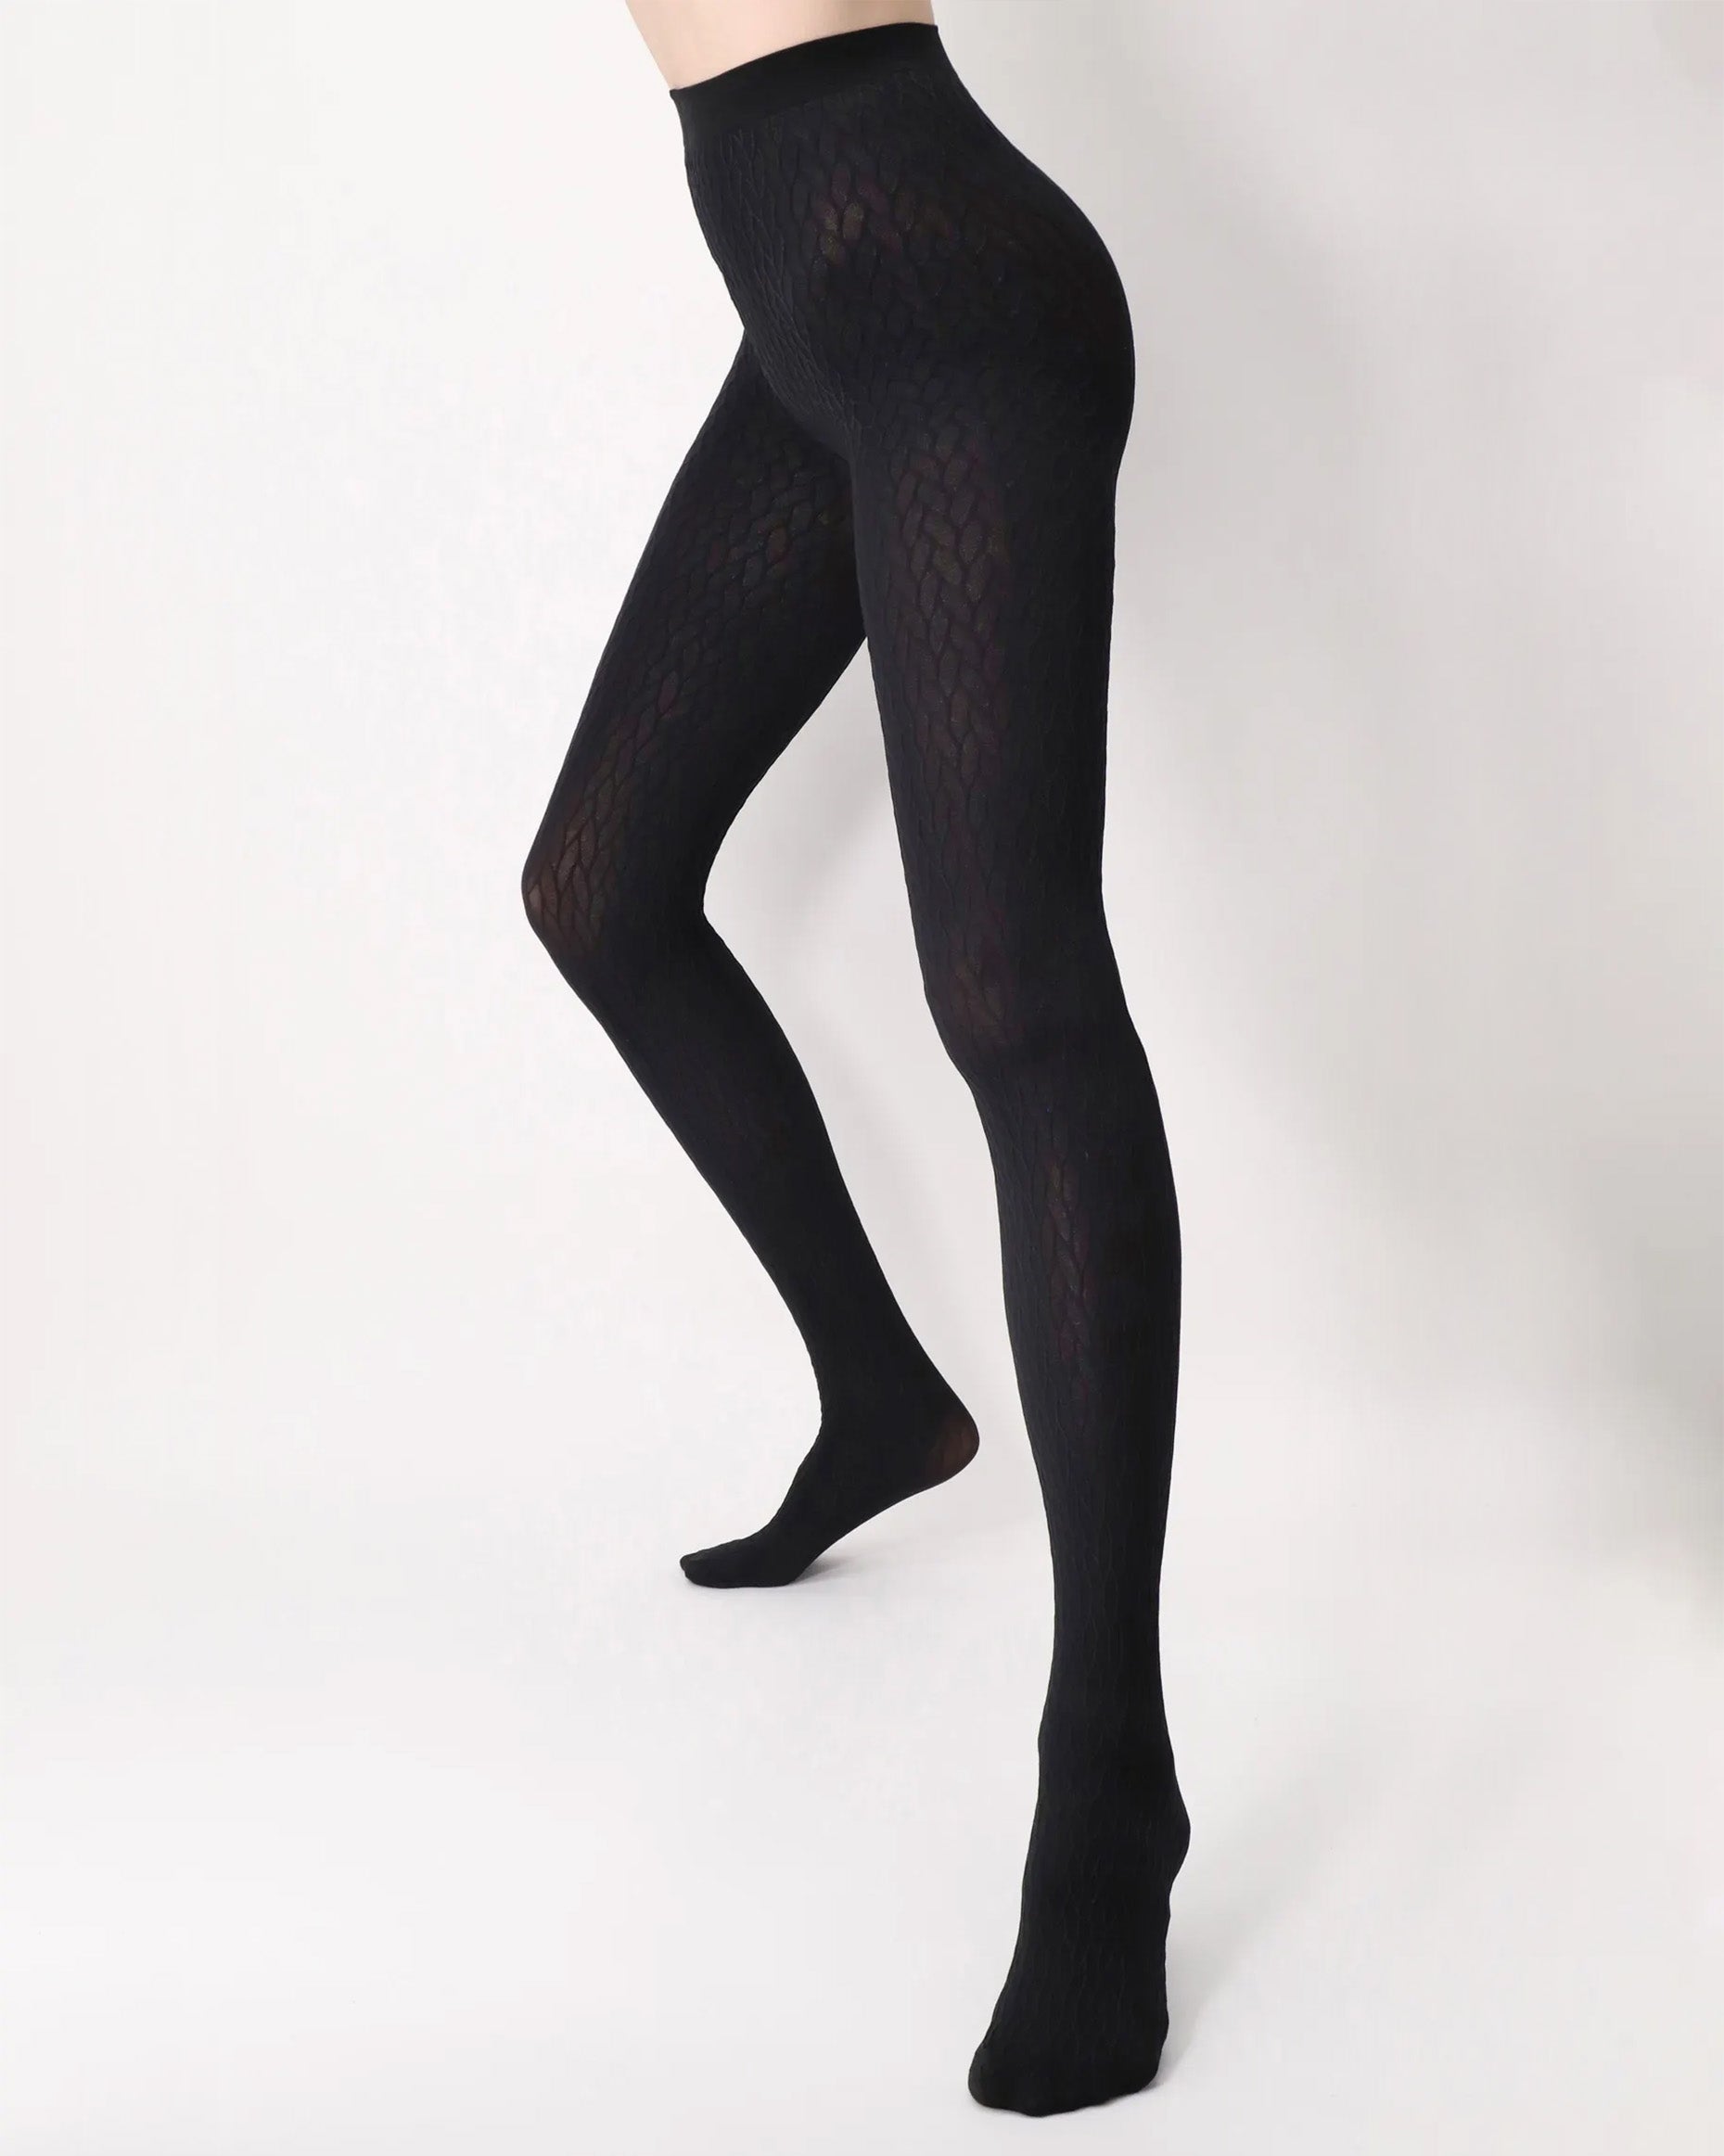 Oroblù Winding Tights - Black opaque fashion tights with an all over subtle braided cable knit style textured pattern